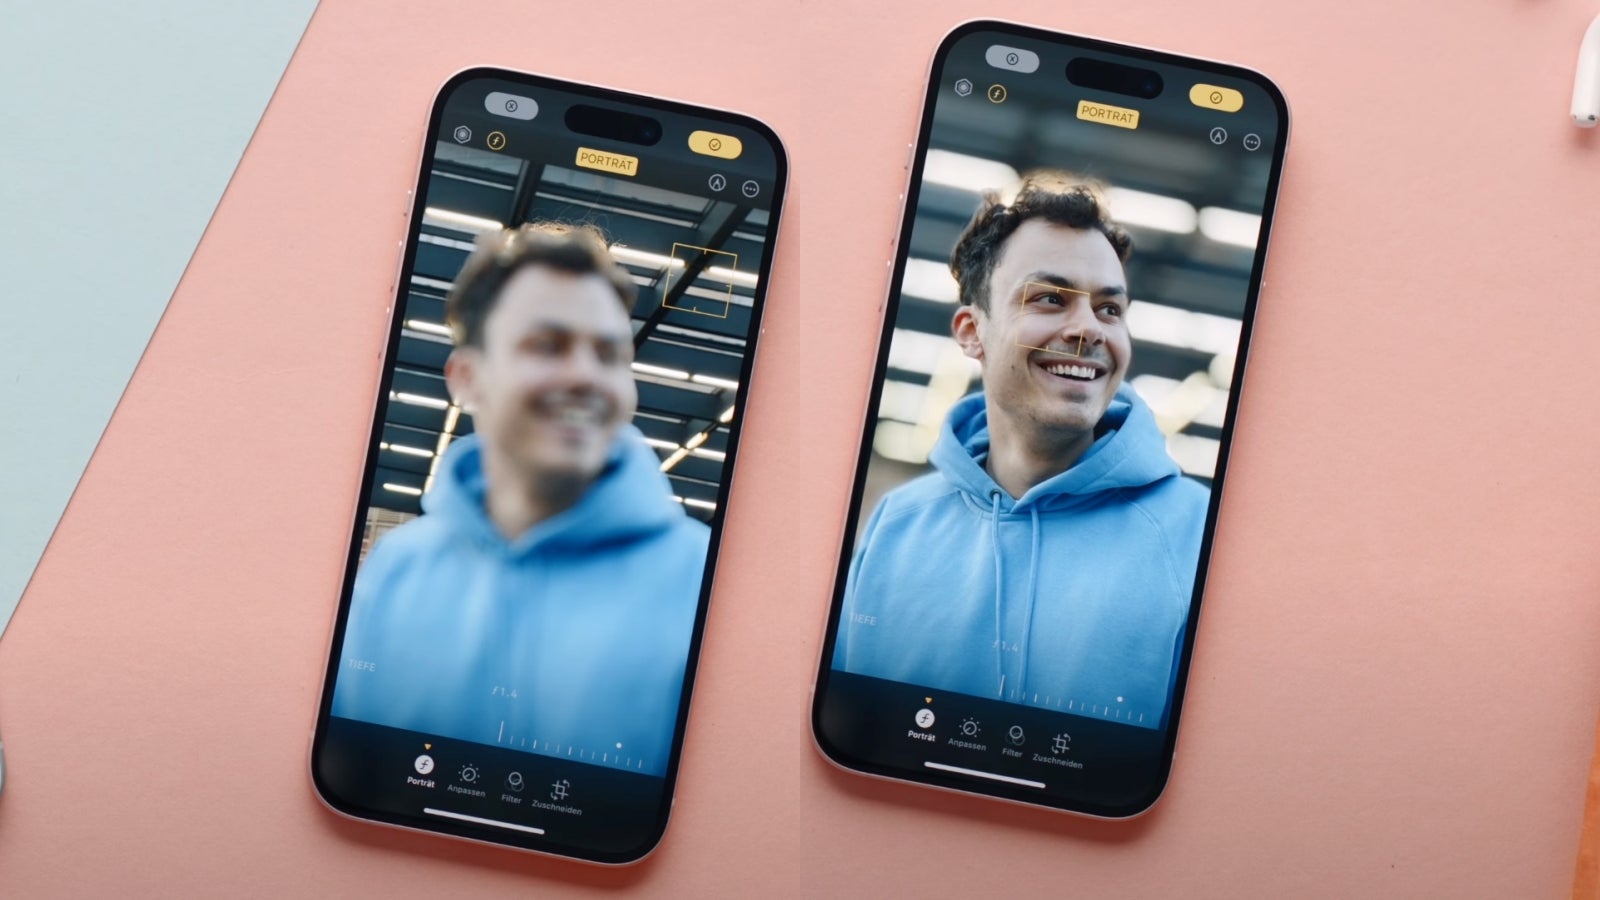 The iPhone 15's revamped Portrait mode lets you take a regular photo and add the portrait effect later and change the focus point. You can also take 2x zoom portraits thanks to the 2x virtual lens. - $800 iPhone 15 seems too good to be real: Apple can be super generous when the bar is set low